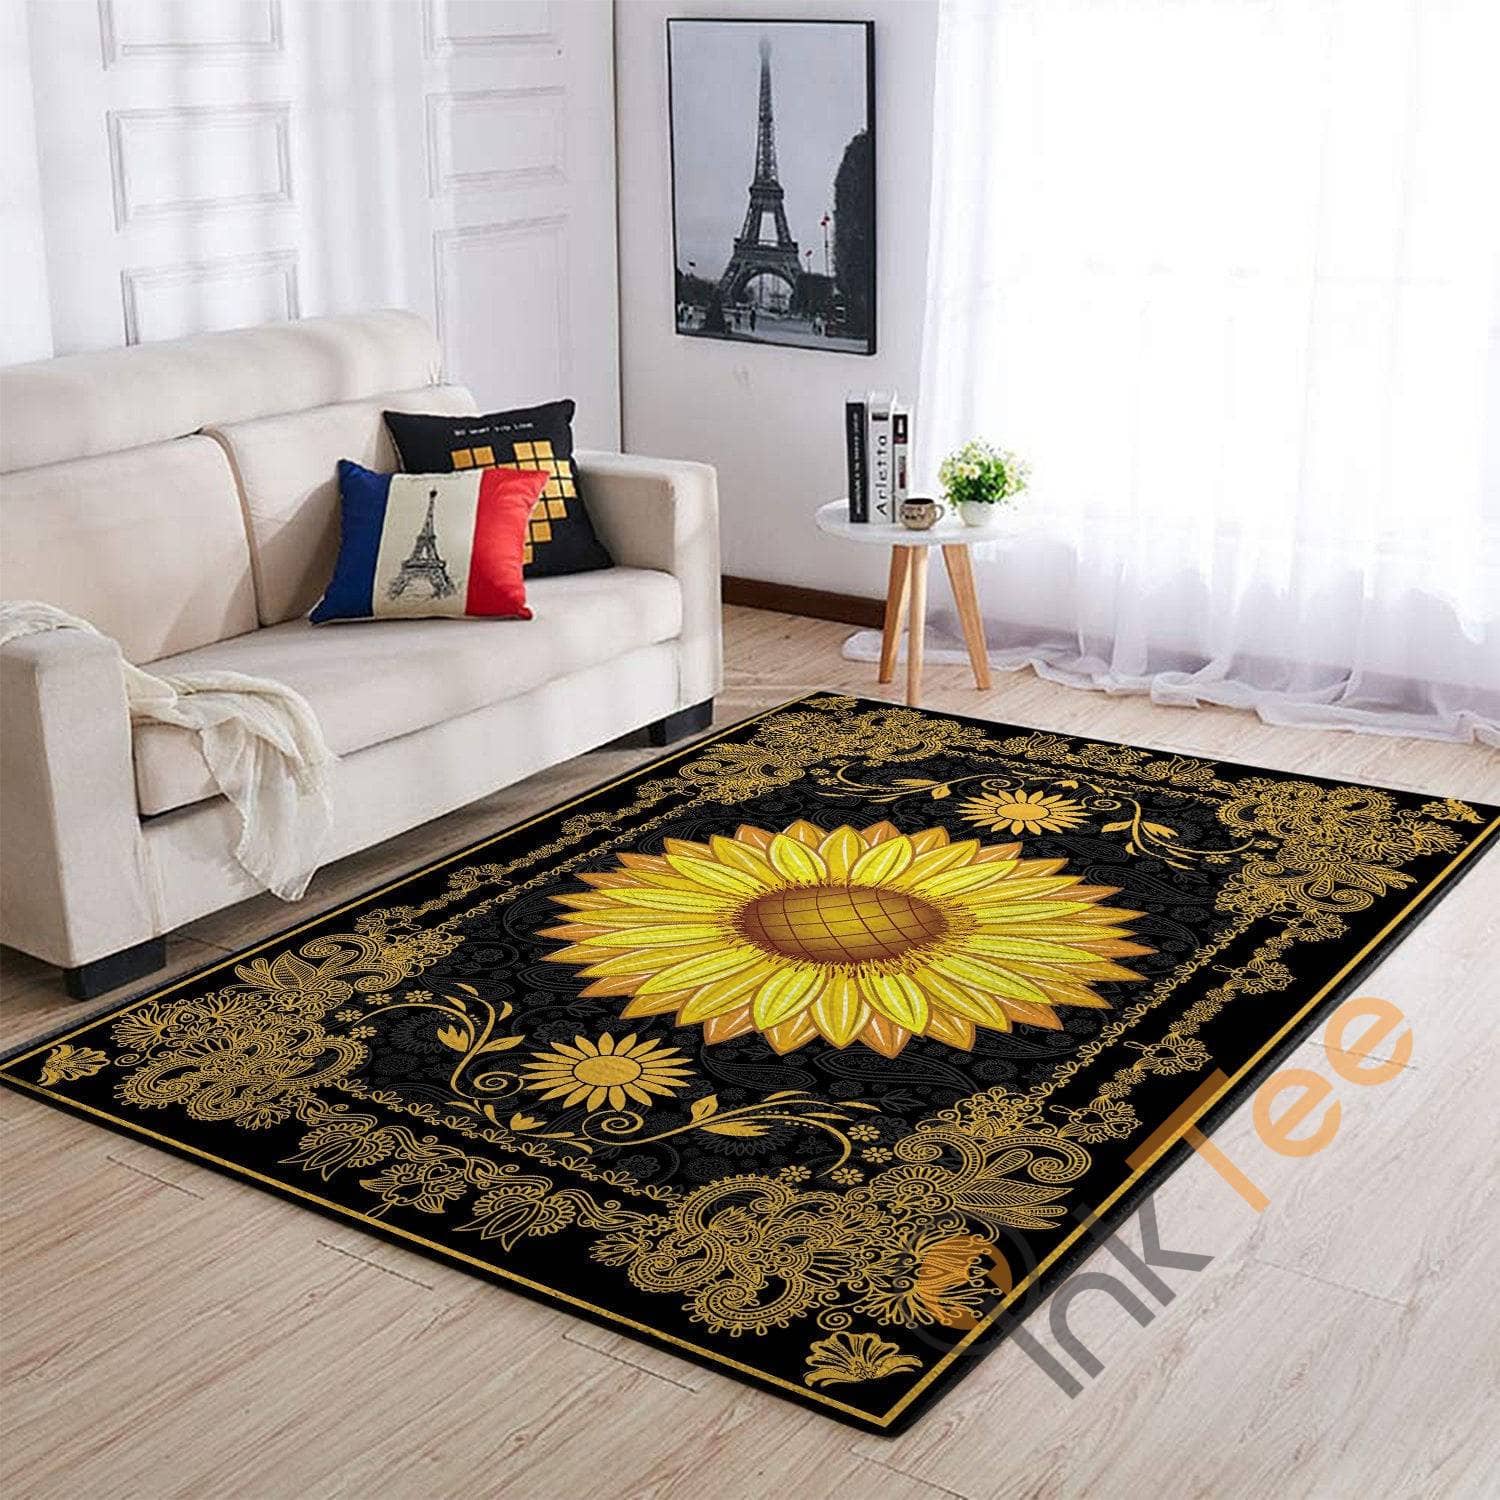 Hippie Sunflower And Golden Royal Pattern Soft Living Room Bedroom Carpet Highlight For Home Beautiful Rug